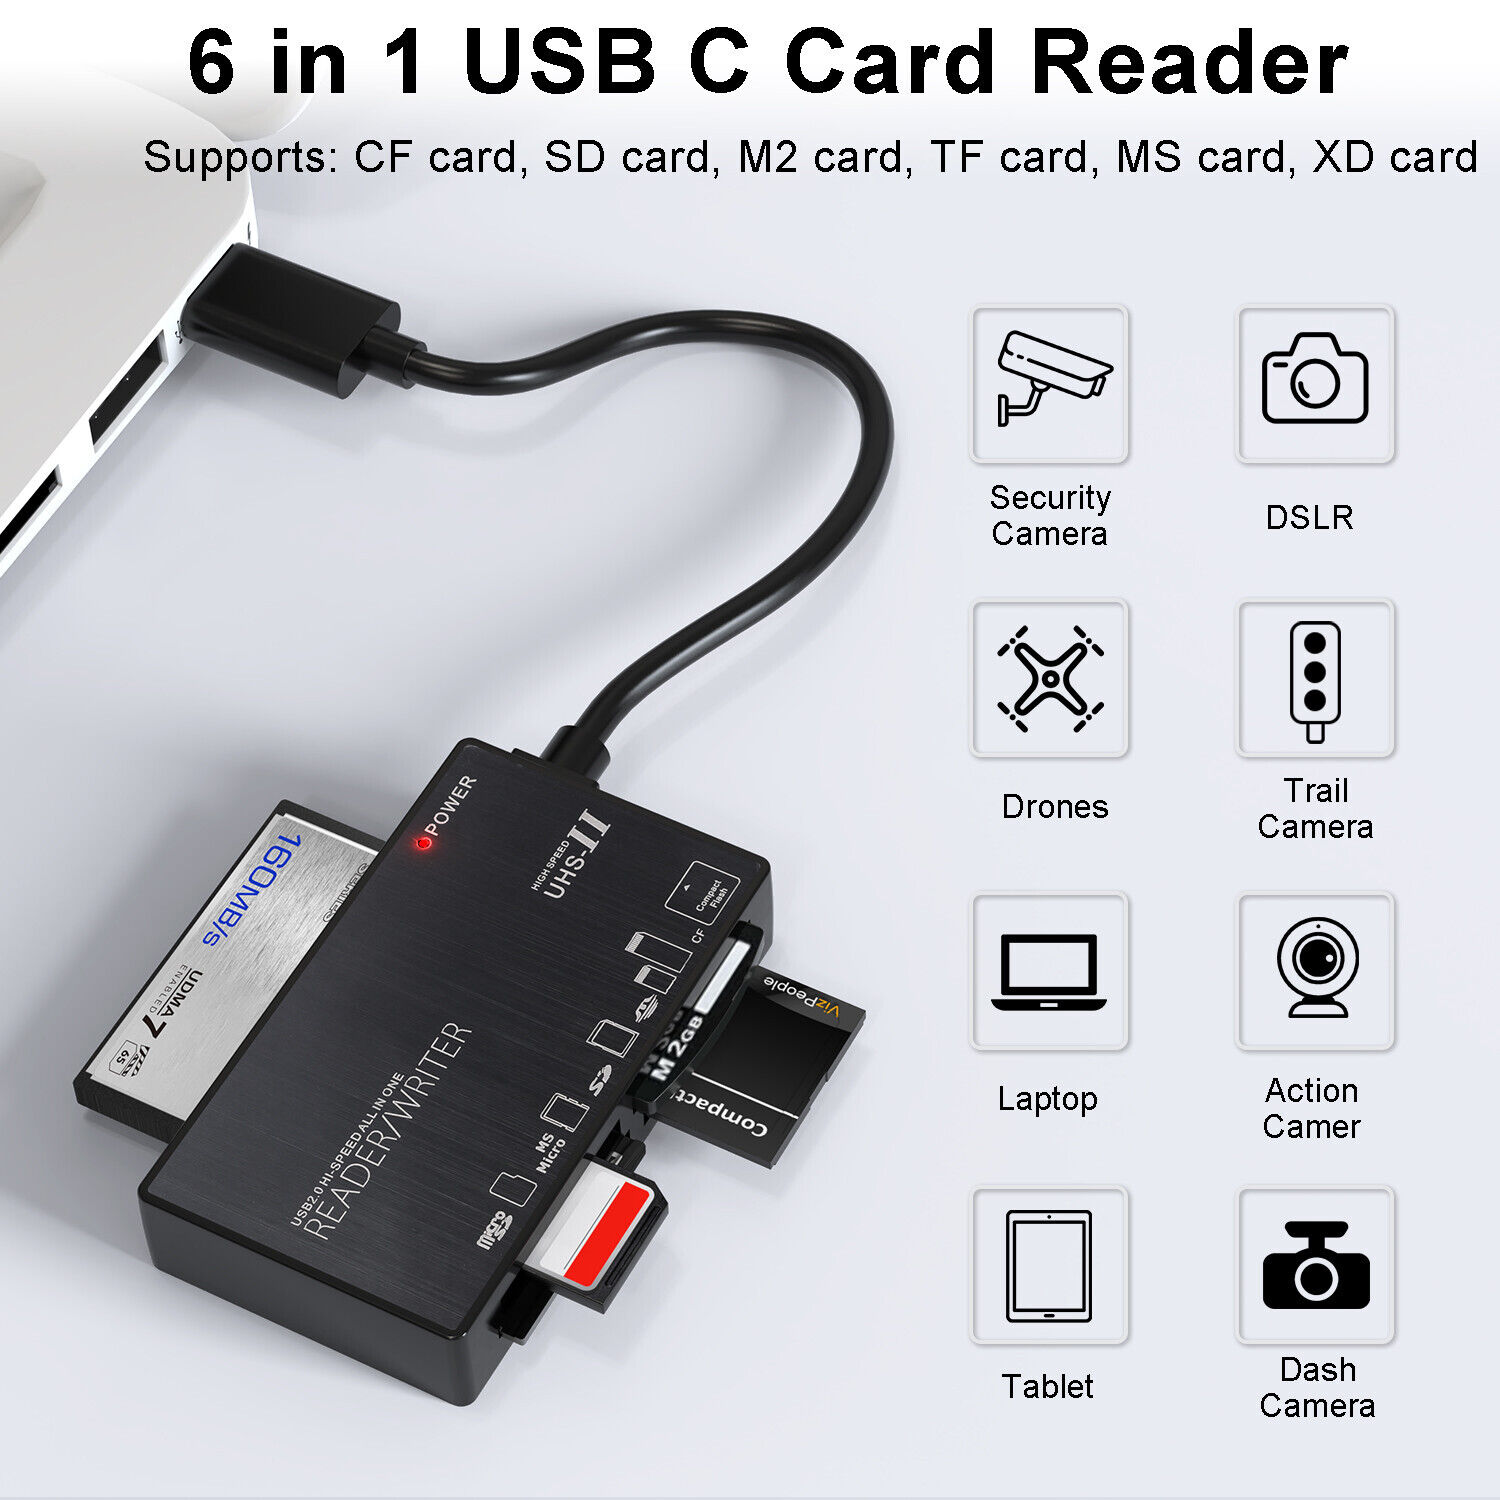 6-IN-1 Memory Card Reader USB 2.0 High-Speed Adapter for Micro SD SDXC CF SDHC